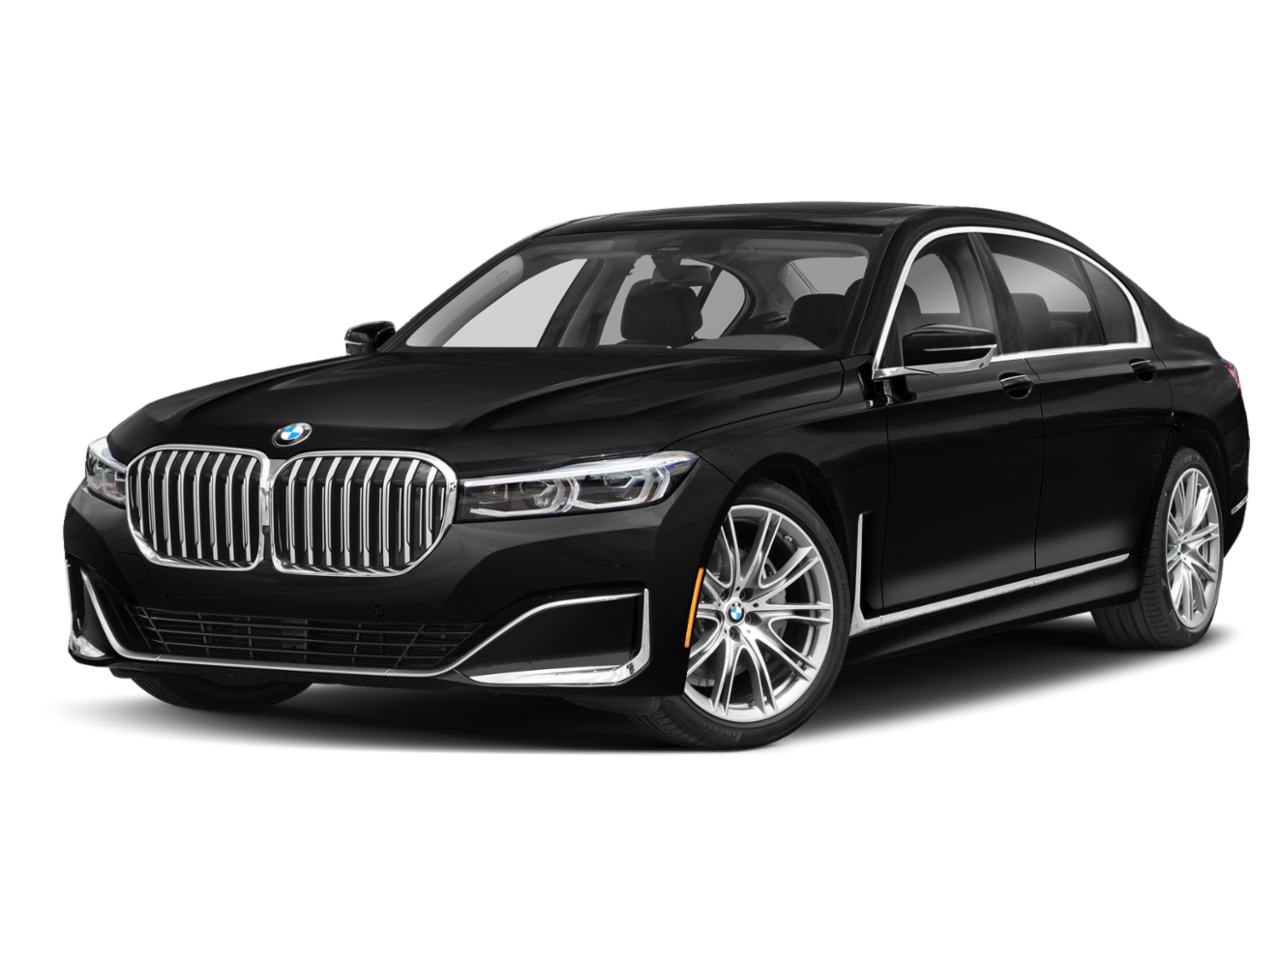 New BMW 740i xDrive from your Tampa, FL dealership, Ferman Automotive